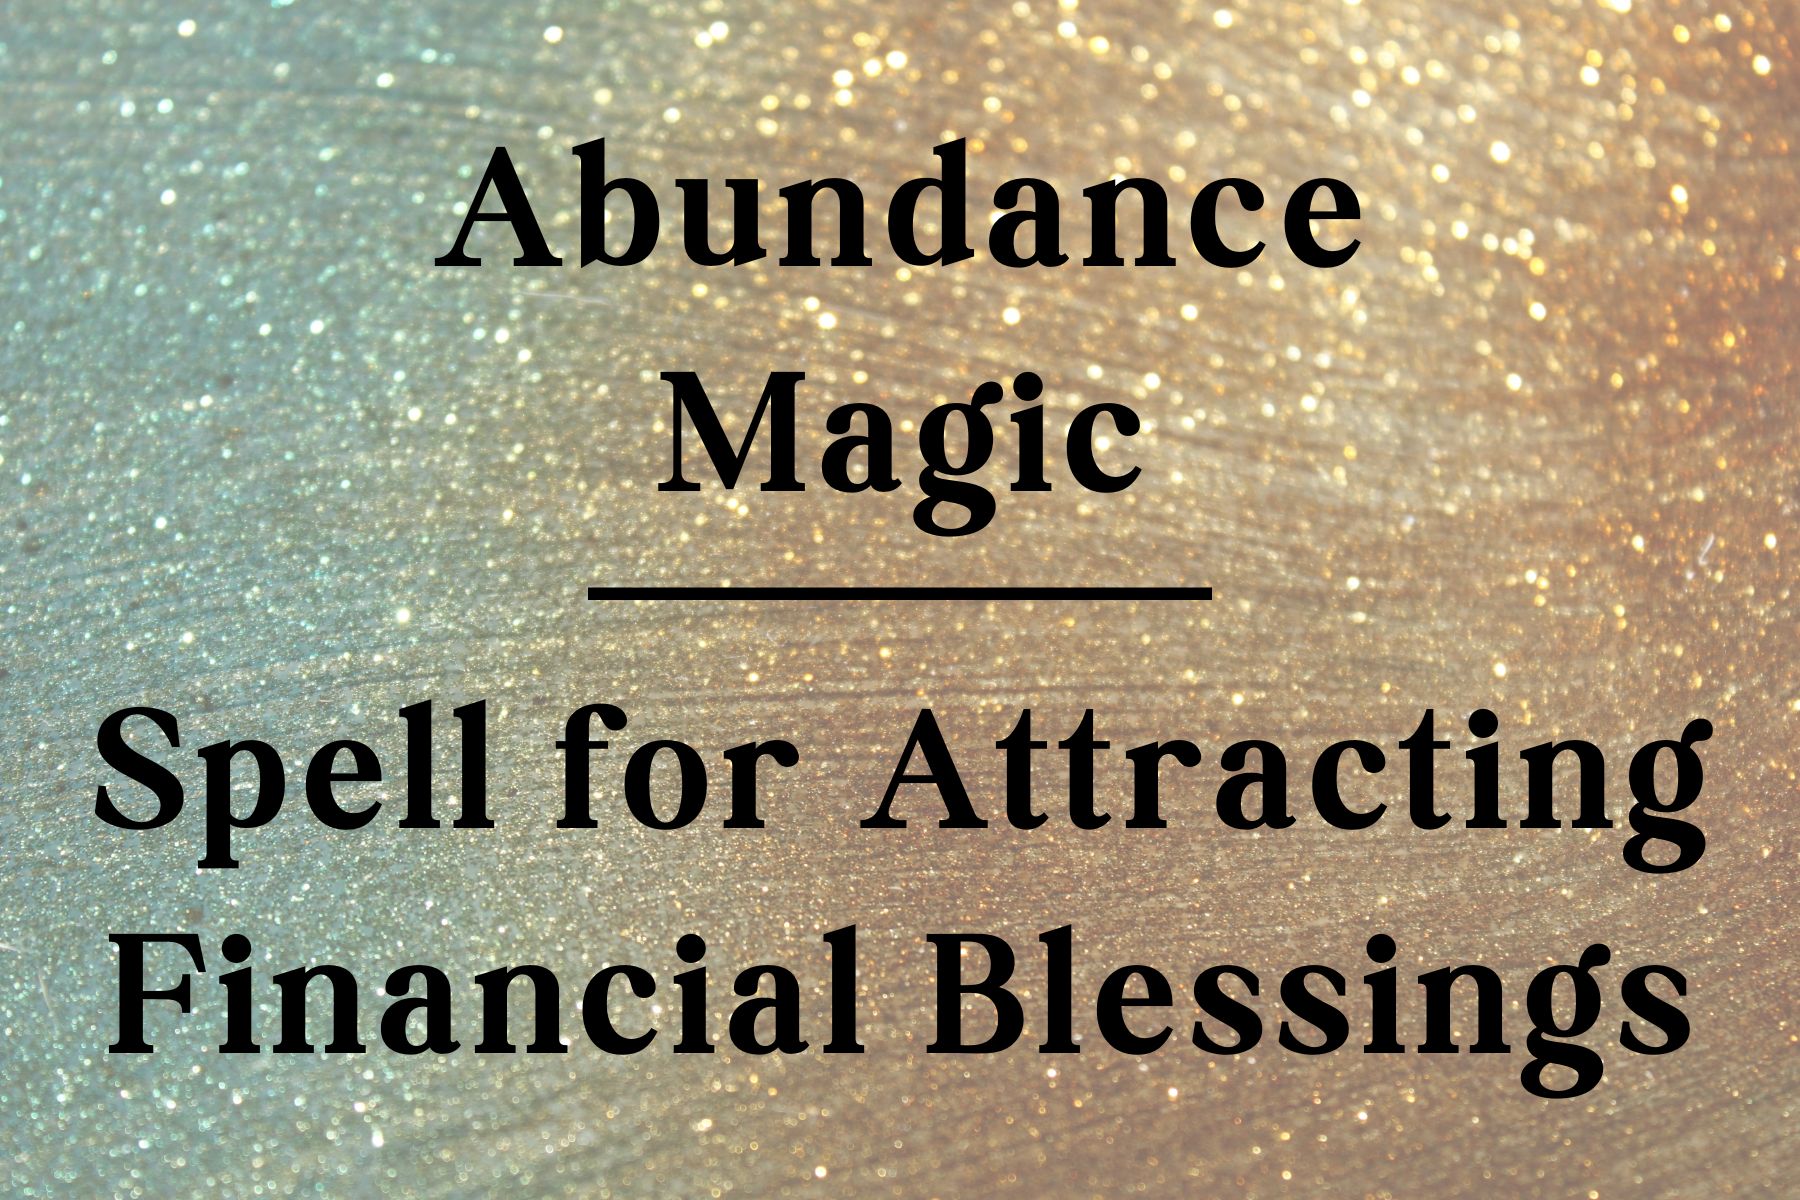 Abundance Magic: Spell for Attracting Financial Blessings